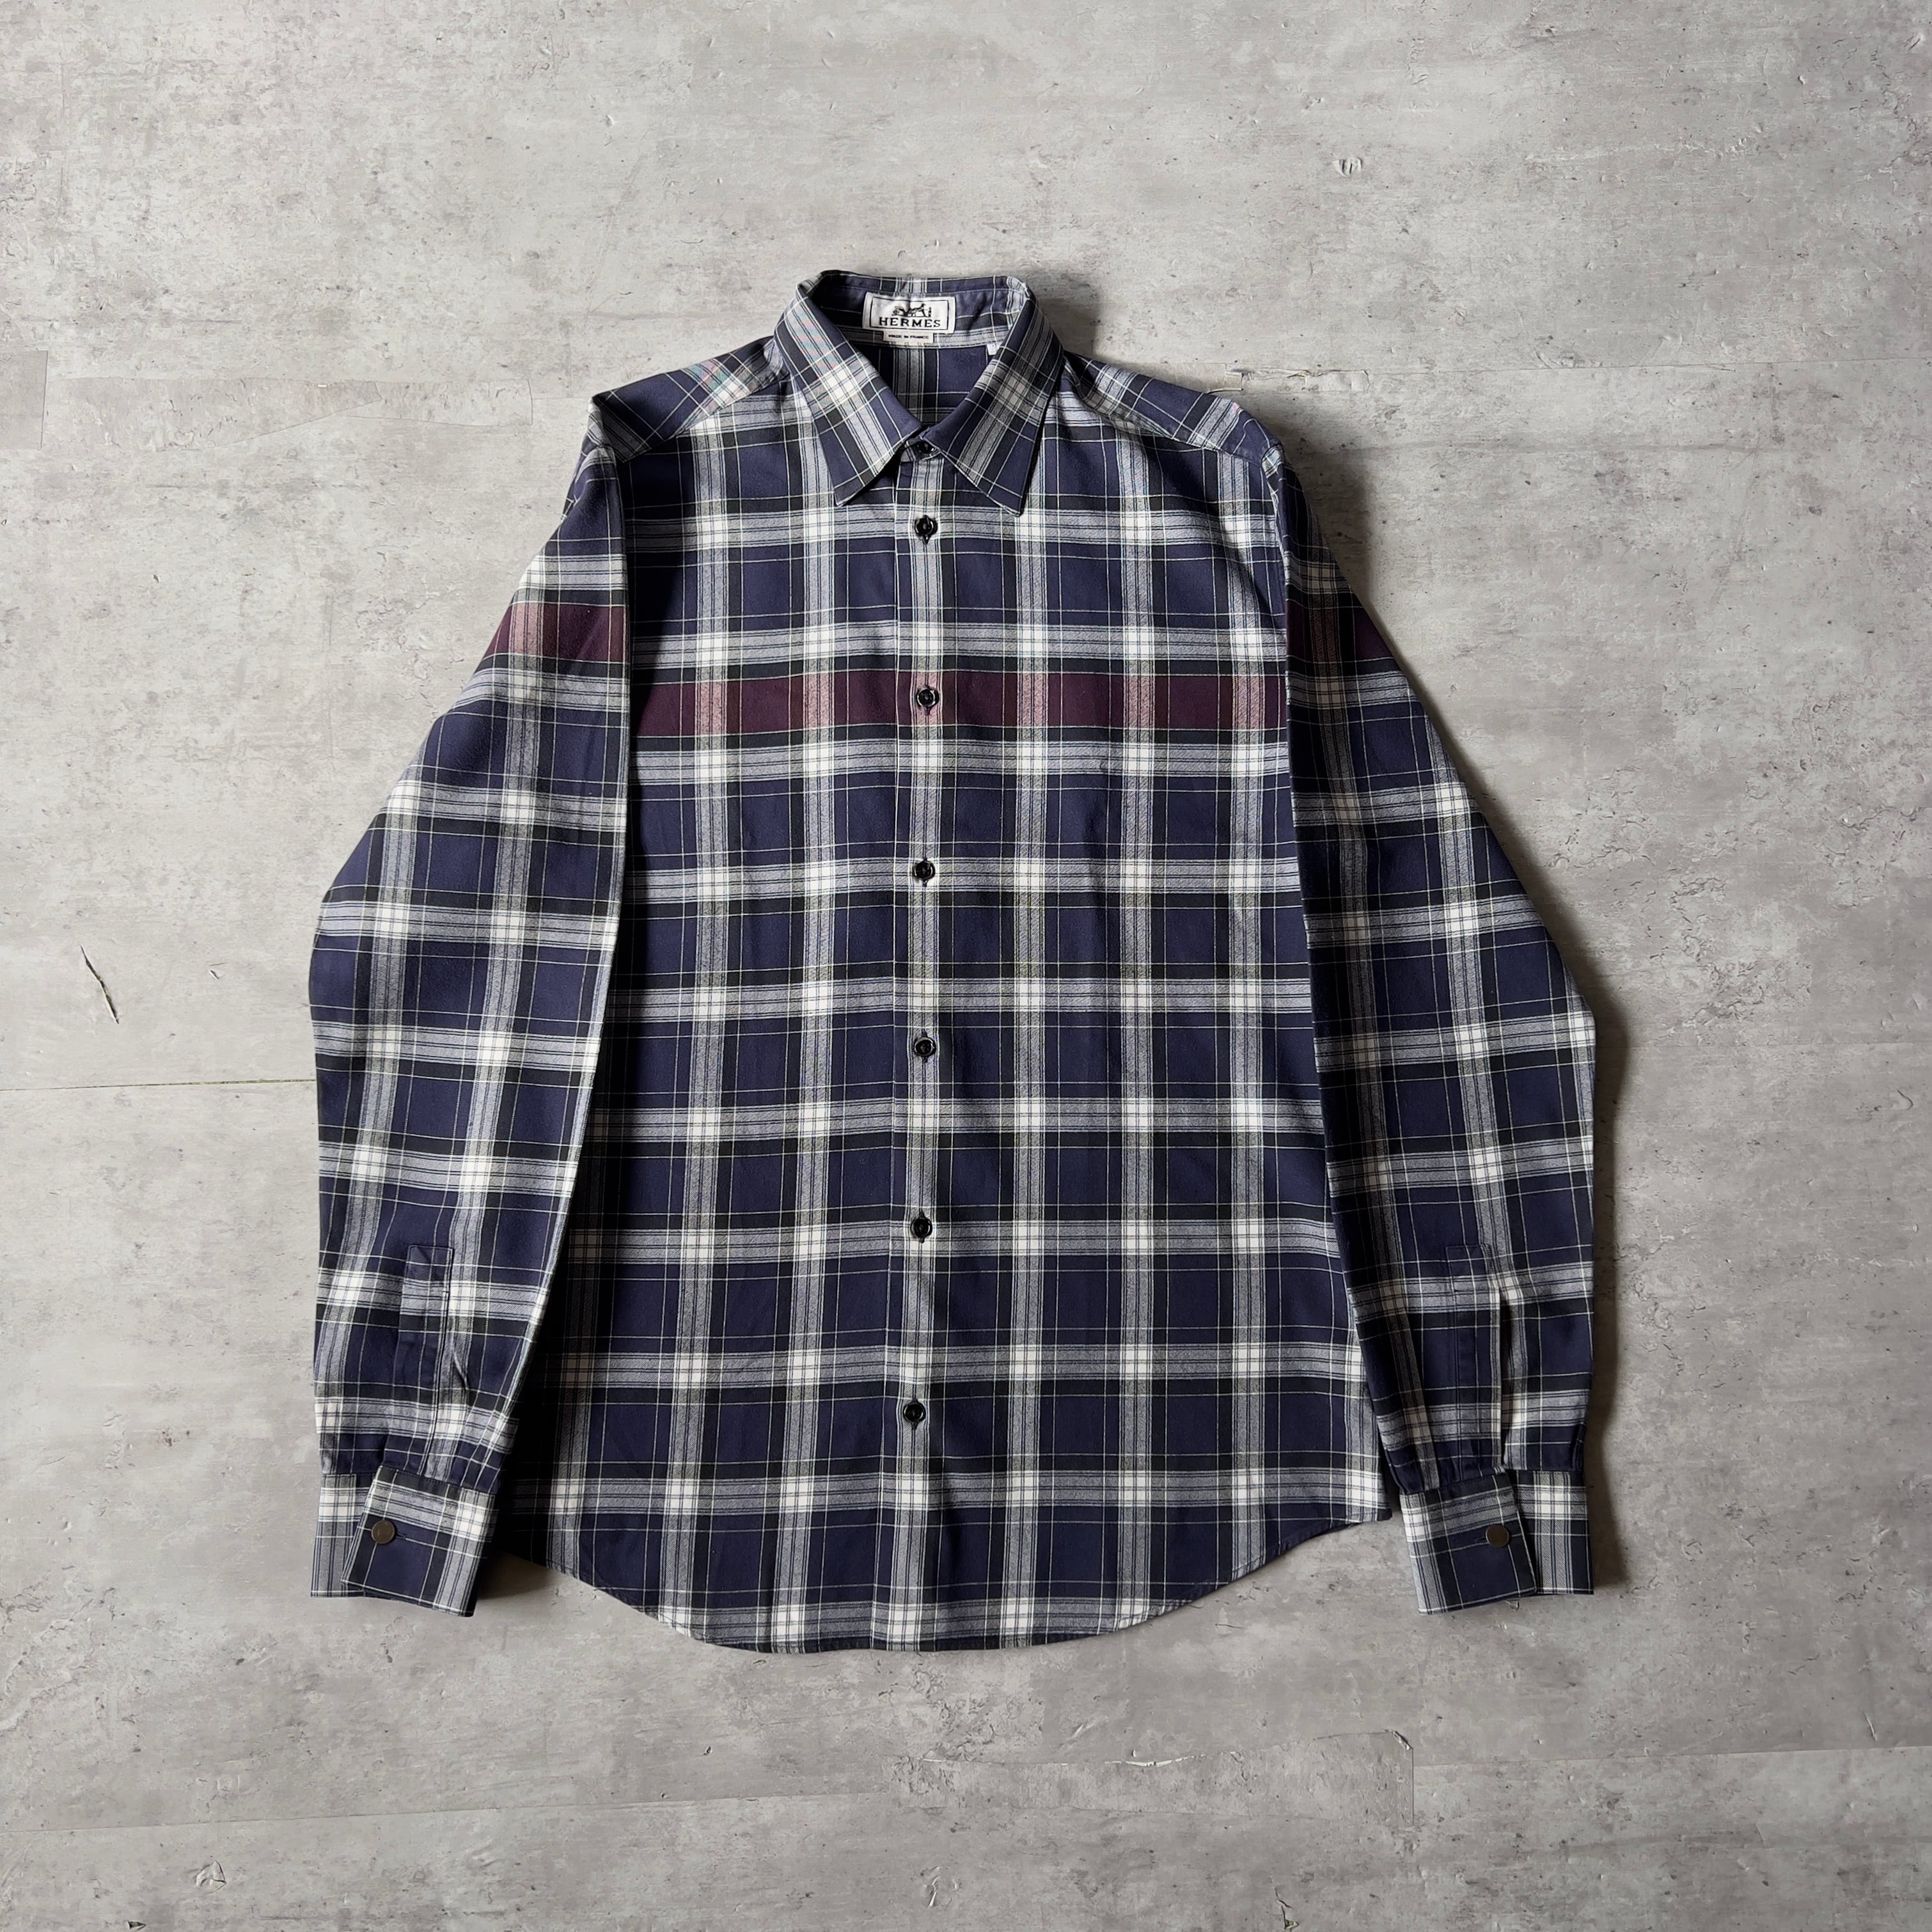 Hermes” check pattern shirt made in France エルメス チェックシャツ